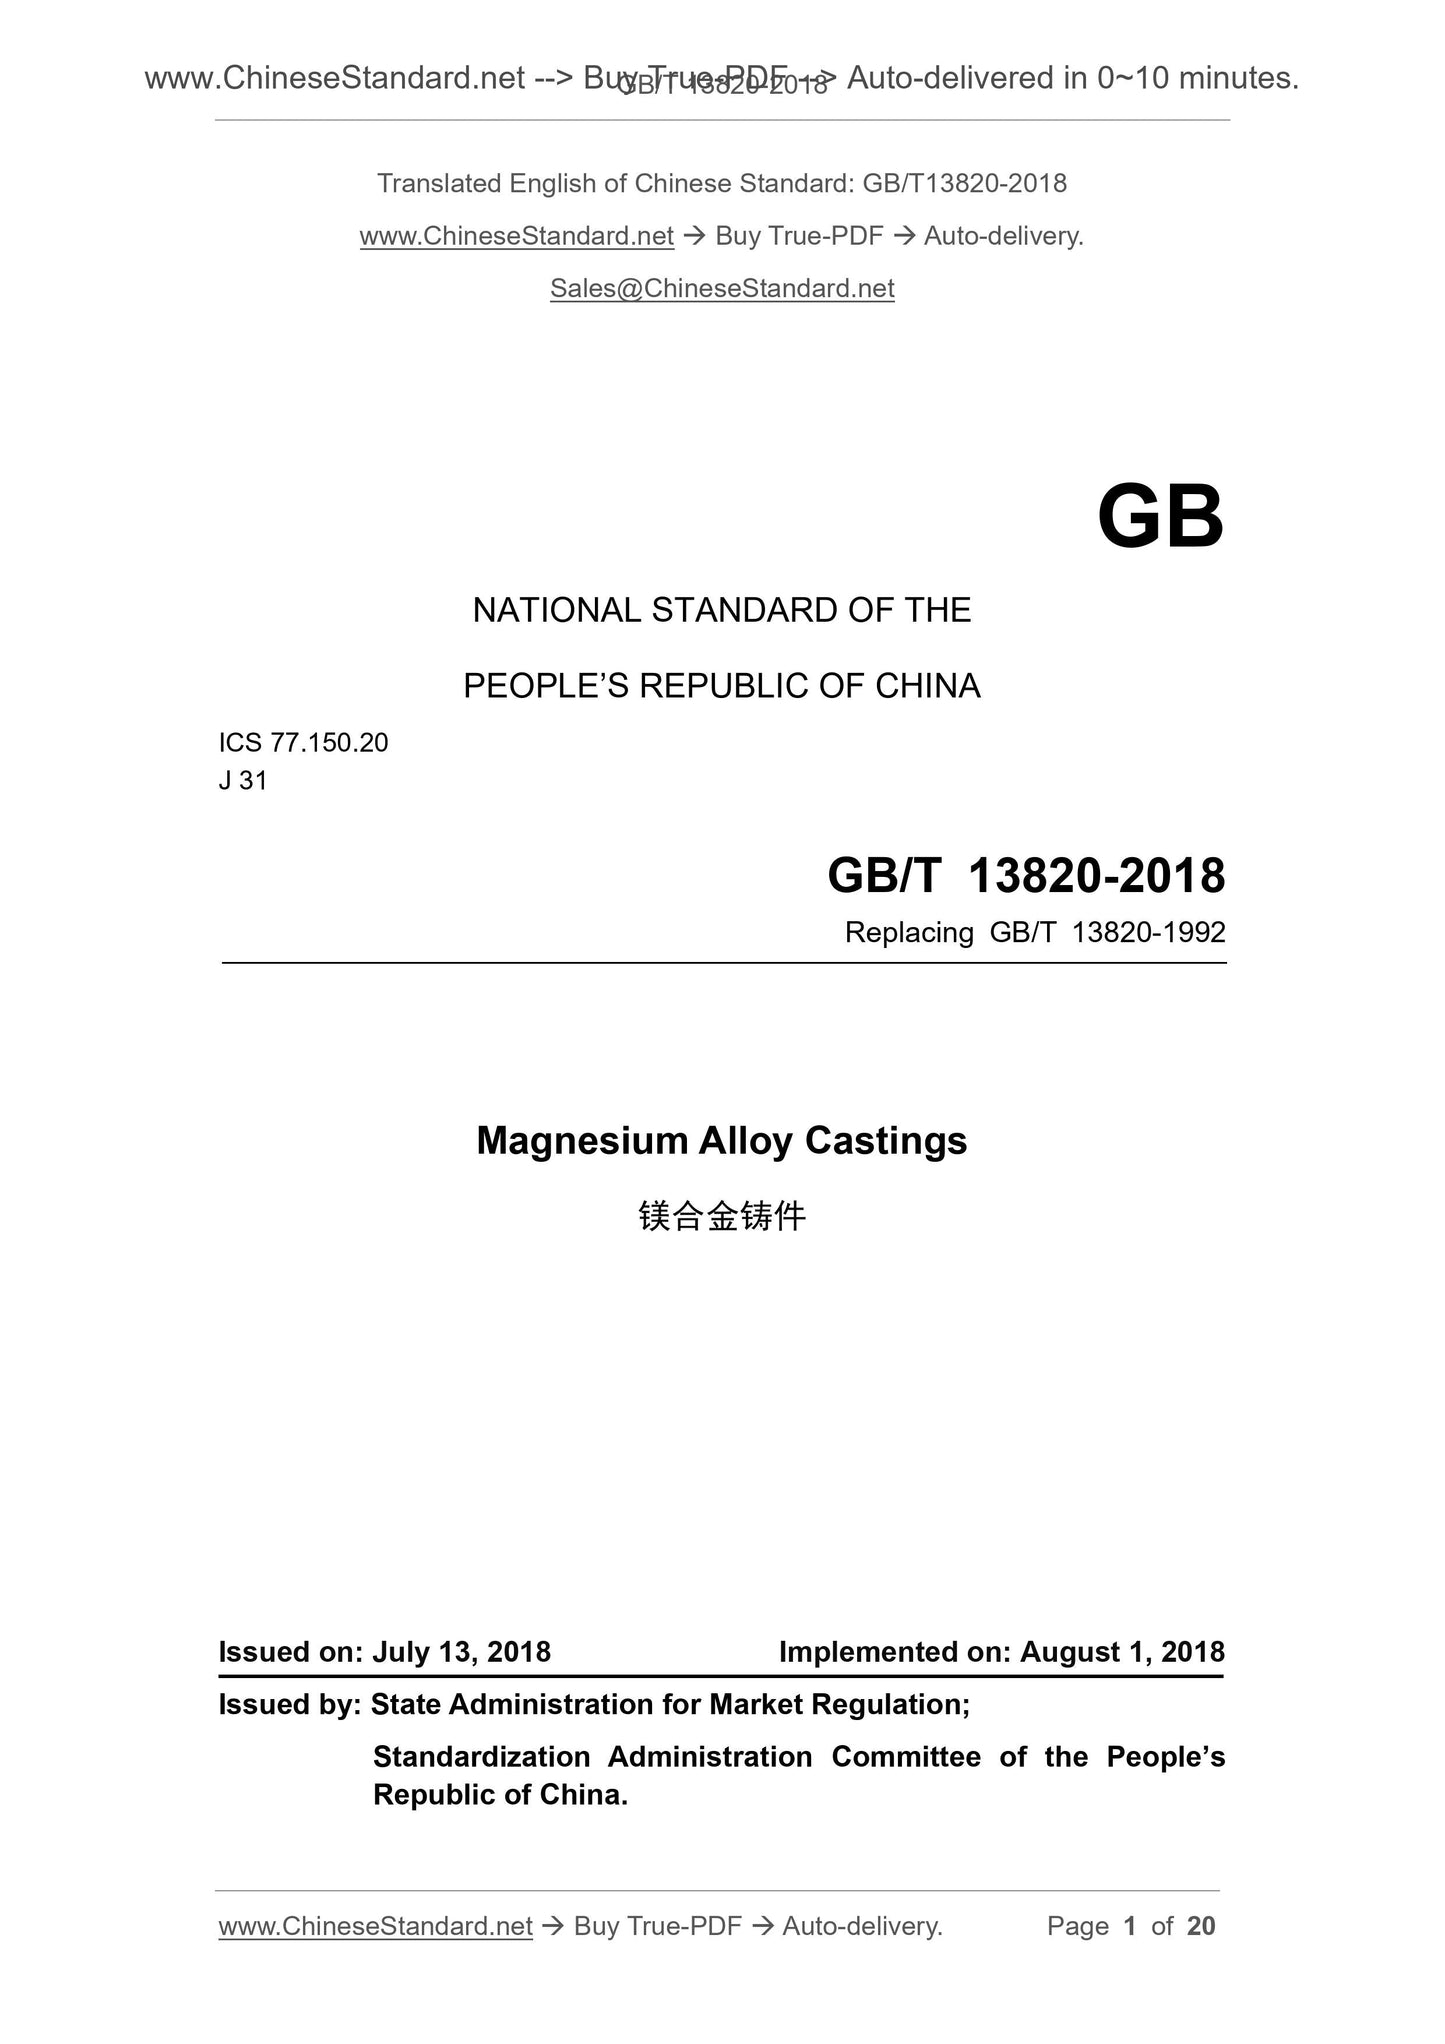 GB/T 13820-2018 Page 1